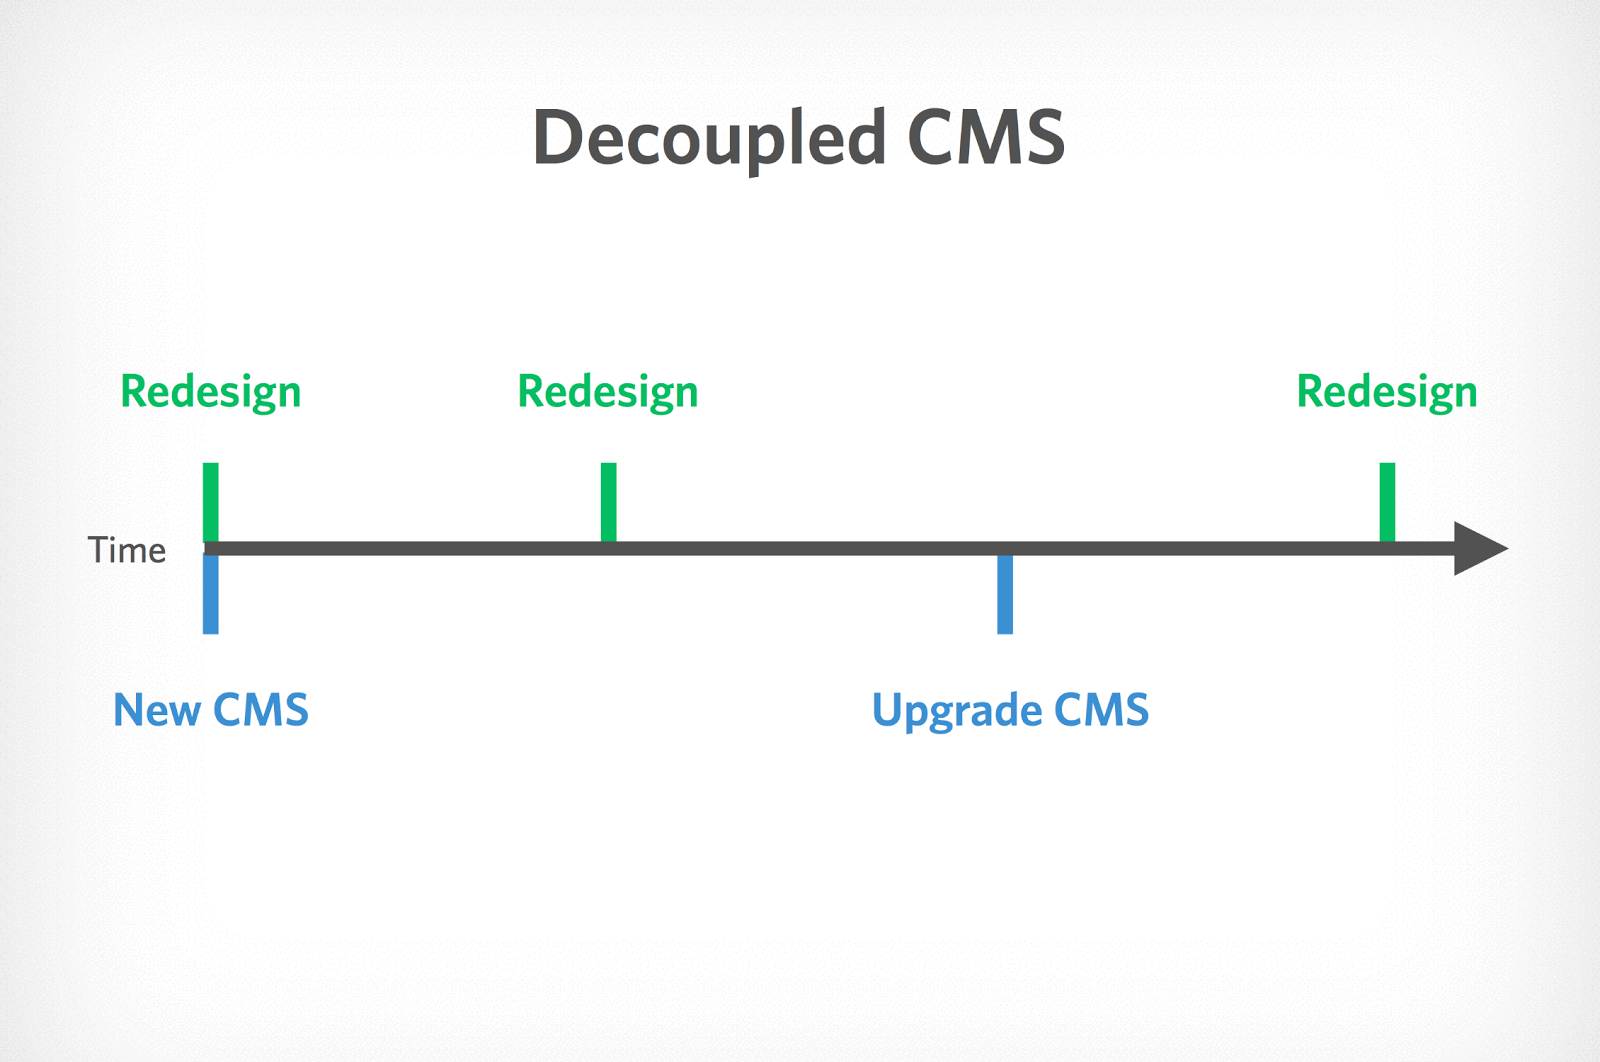 Decoupled CMSes let you evolve the front and back end separately